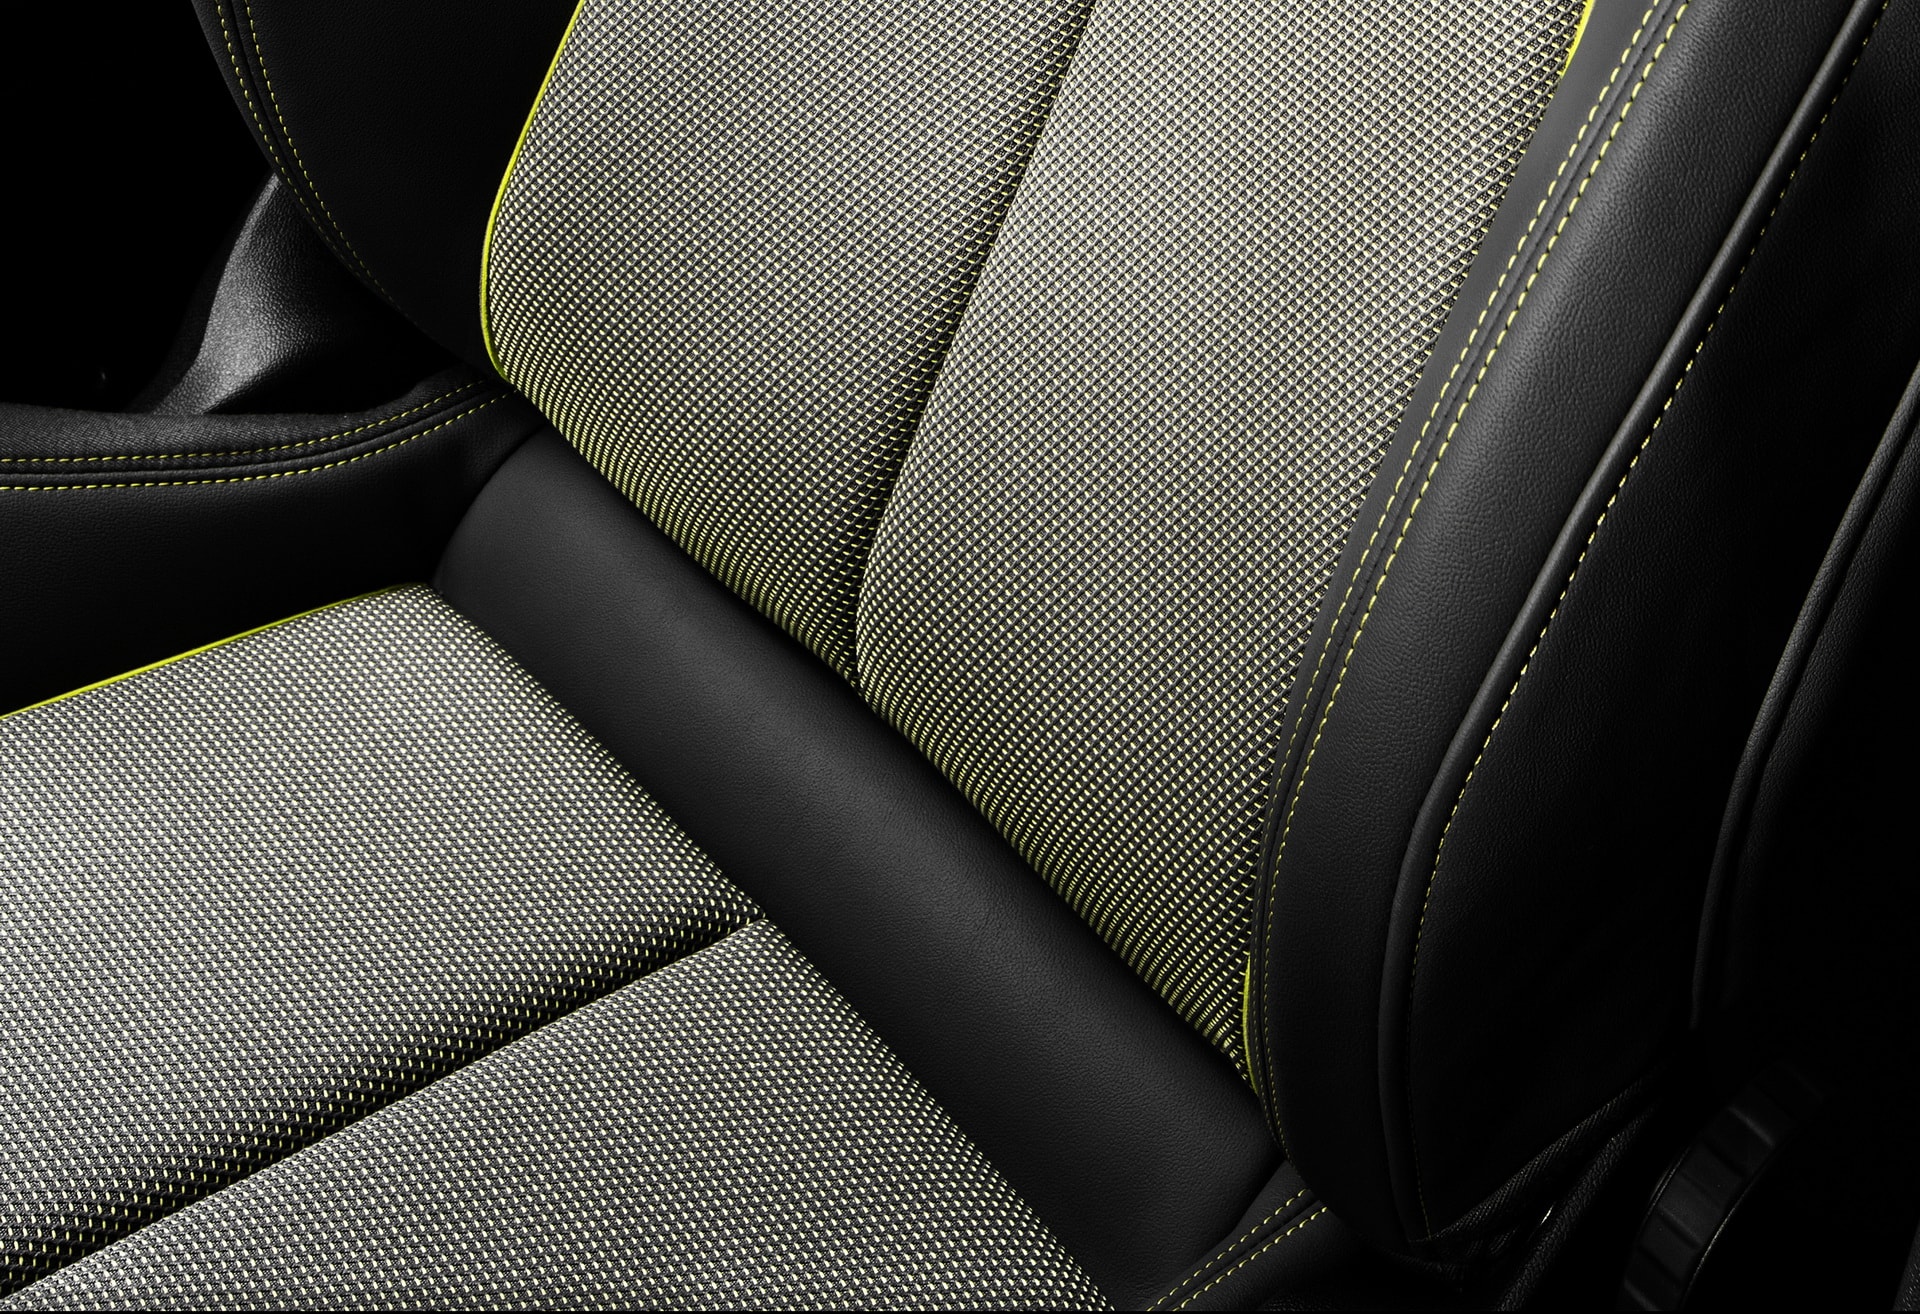 Your Next A3 Will Come With Seat Upholstery Made From Recycled PET Bottles - autoevolution